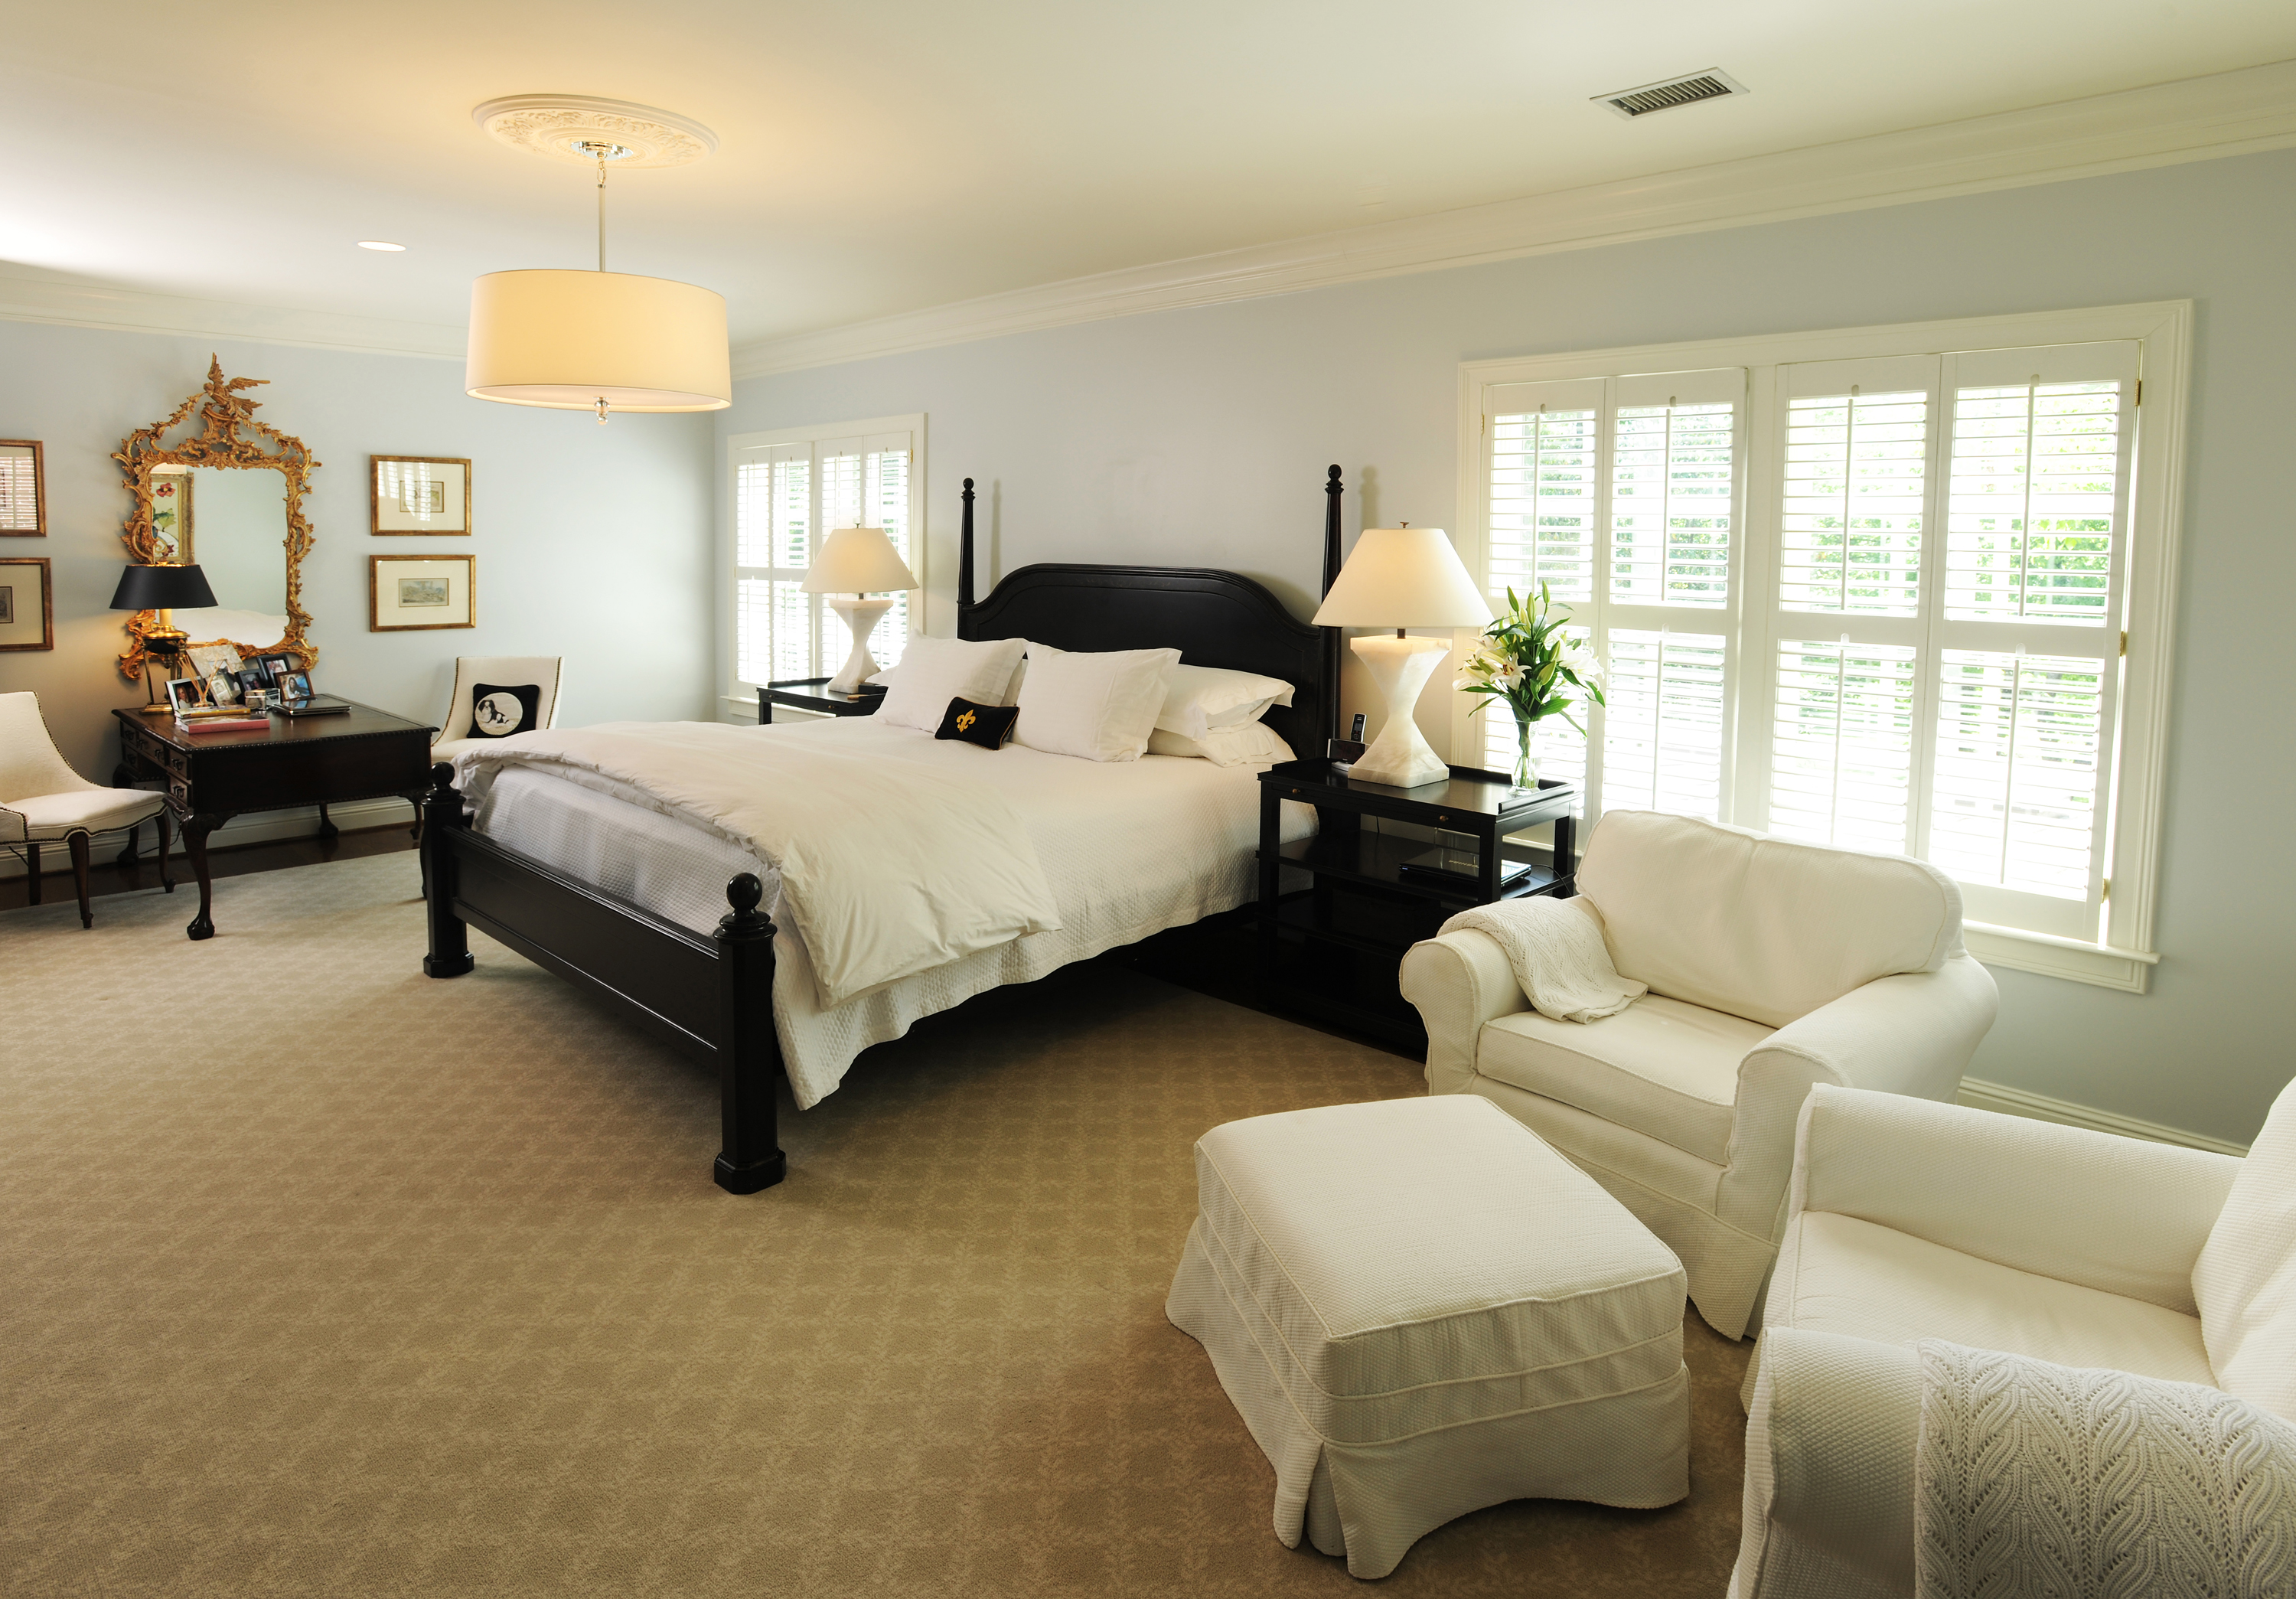 Guest Suites Becoming a Popular Option